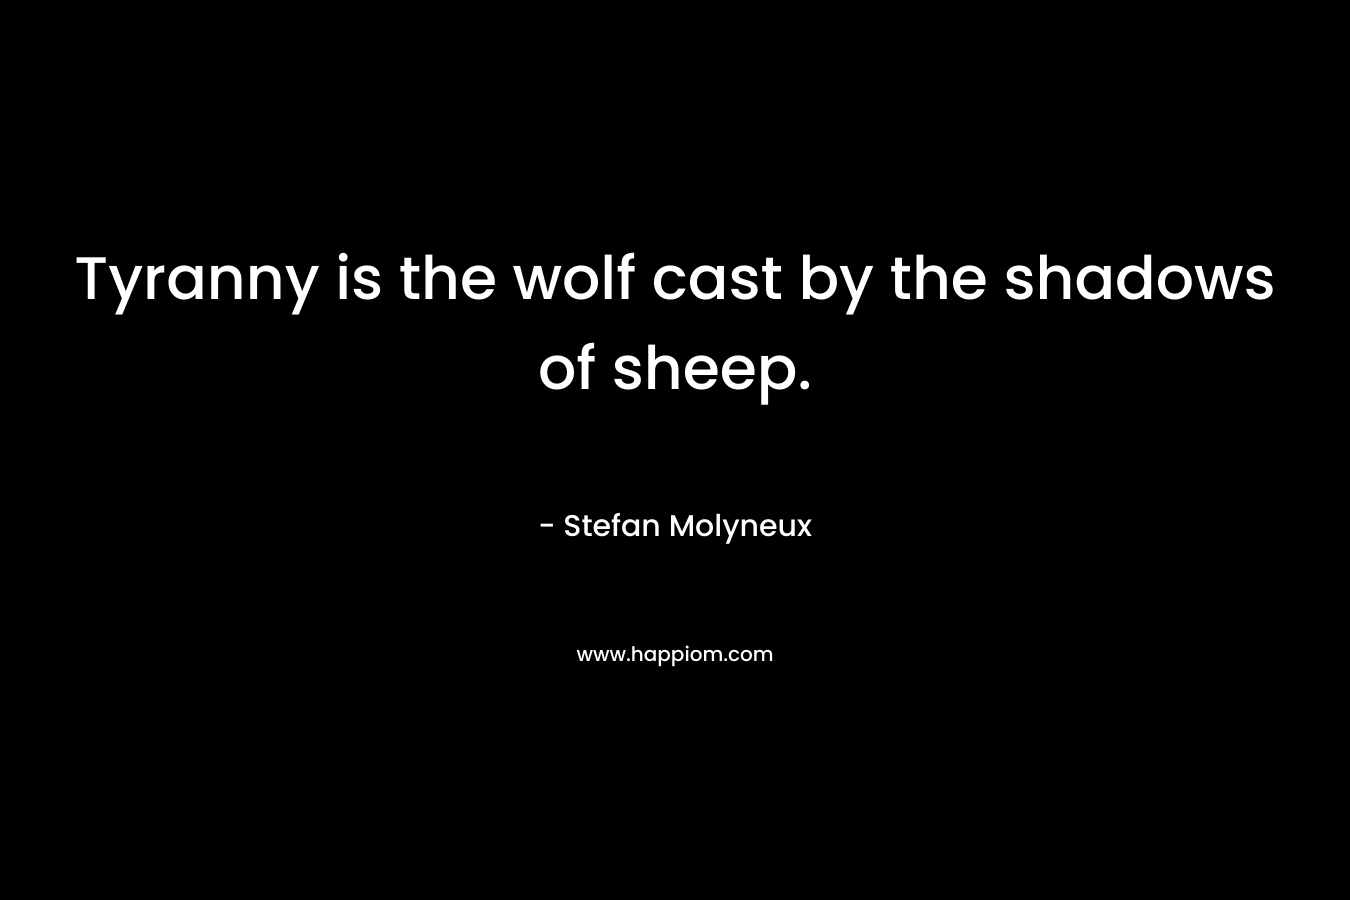 Tyranny is the wolf cast by the shadows of sheep. – Stefan Molyneux